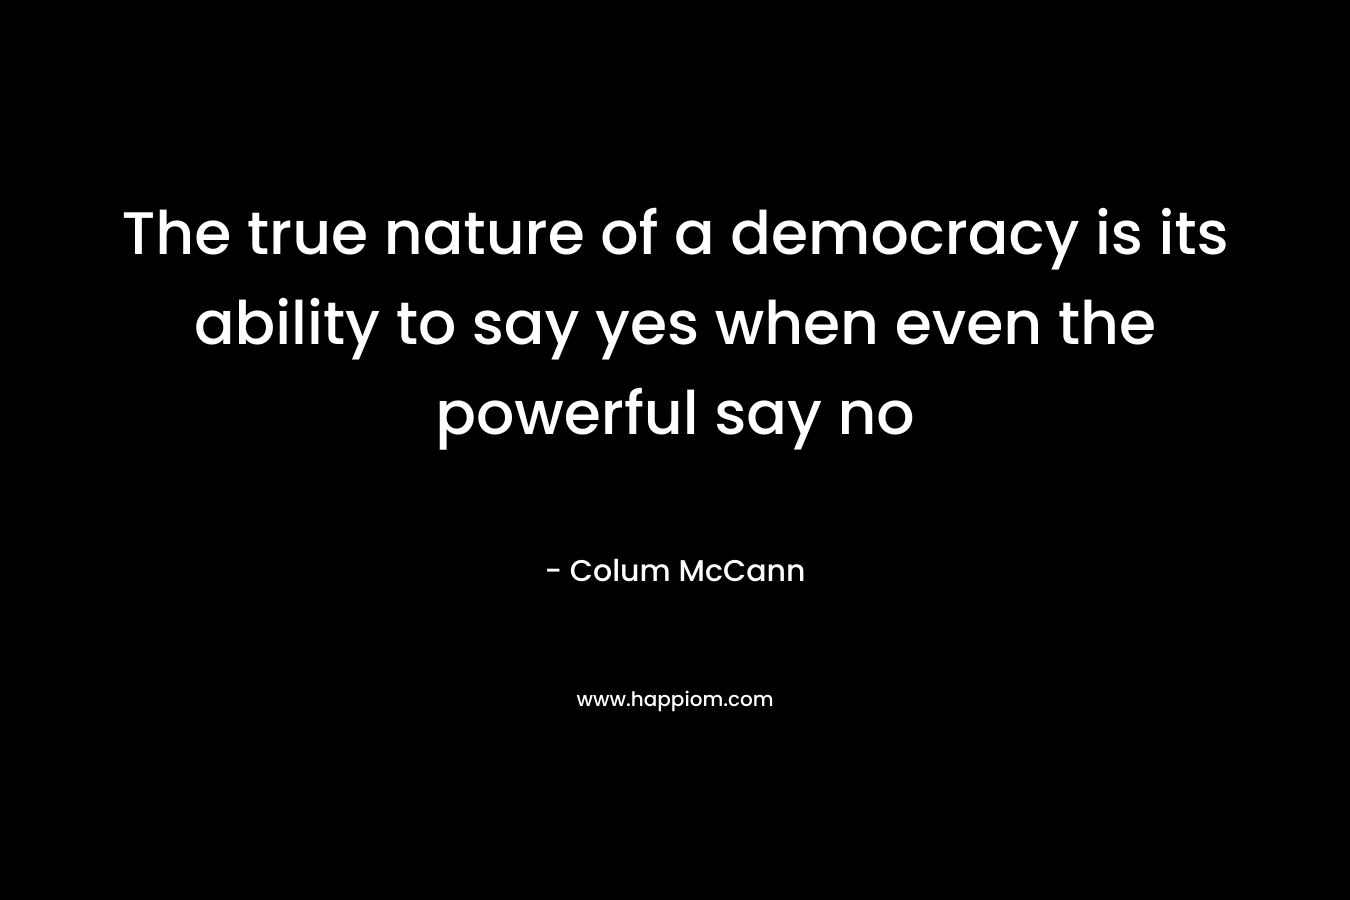 The true nature of a democracy is its ability to say yes when even the powerful say no – Colum McCann